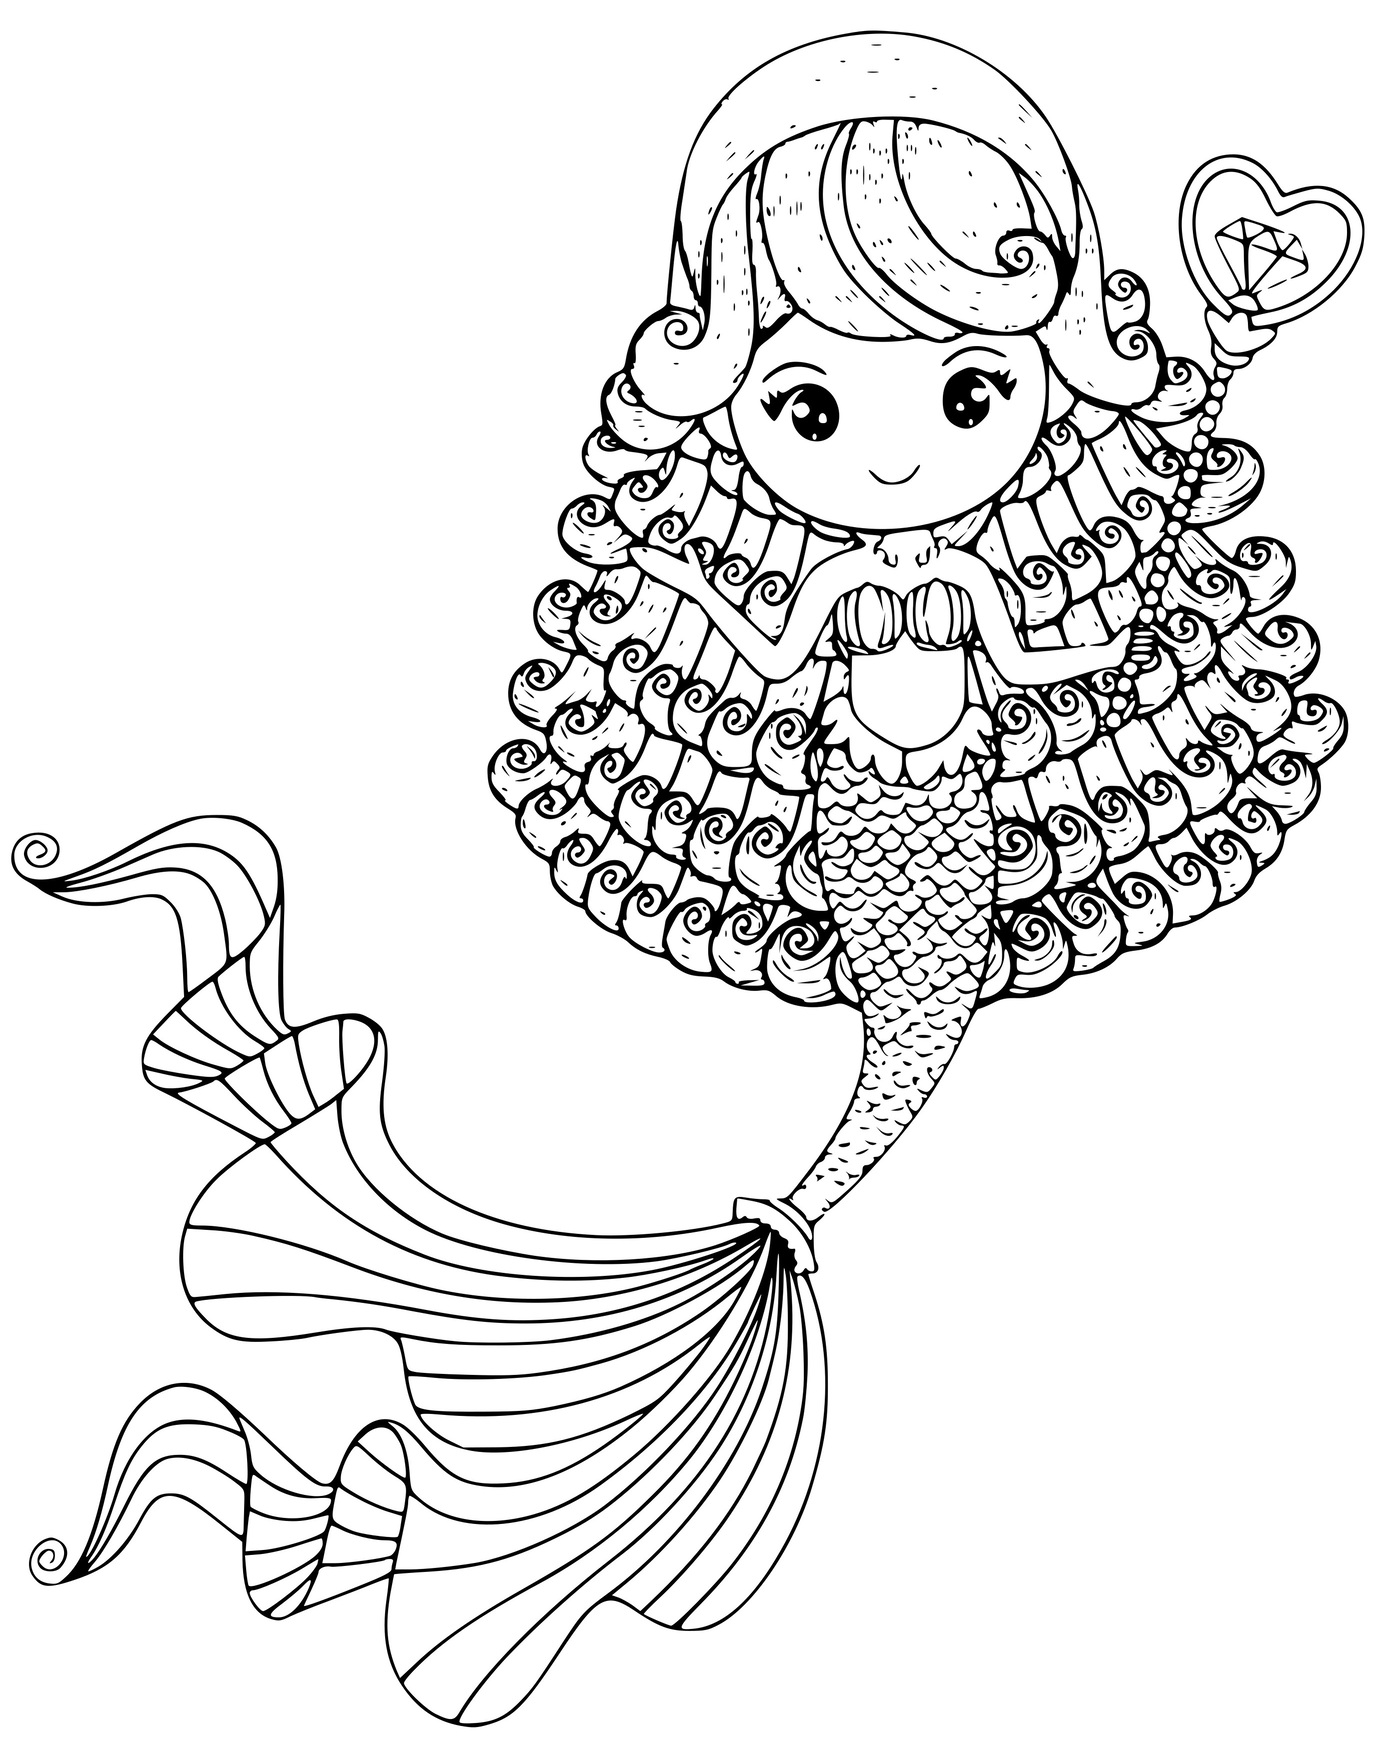 Cute Little Mermaid With A Long Tail Coloring Pages   Coloring Cool